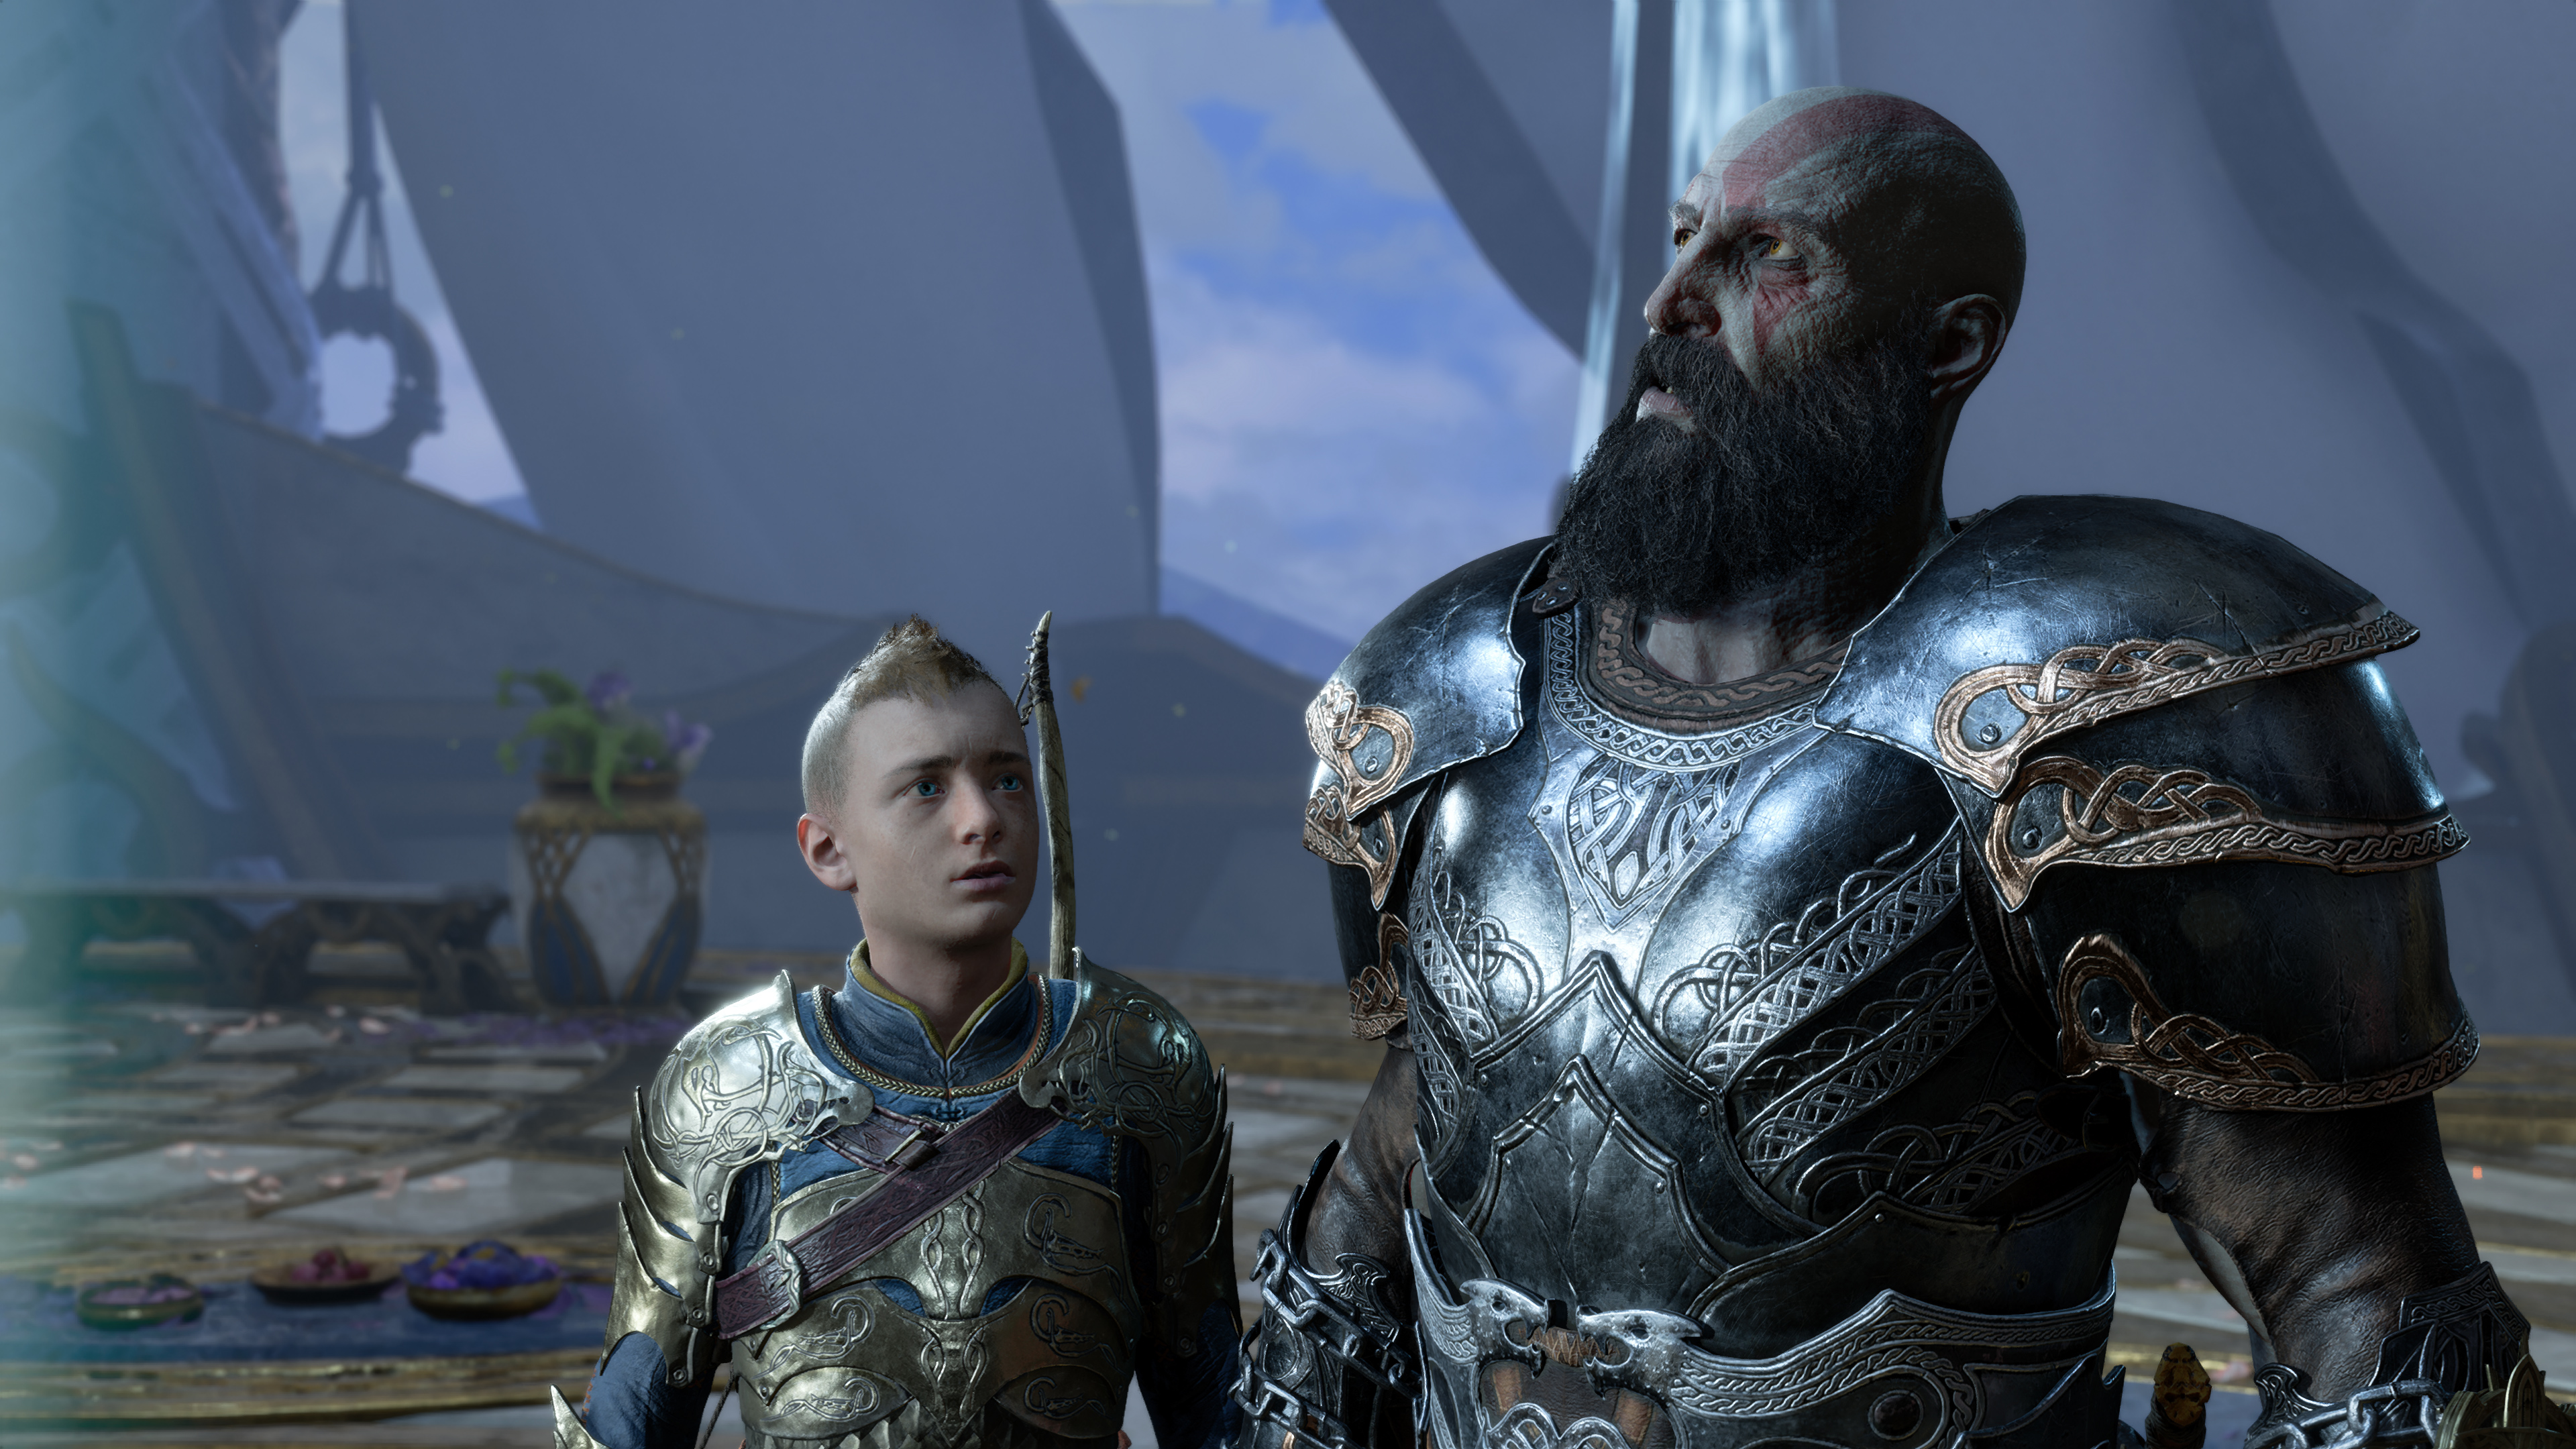 Atreus looking up at Kratos, who is looking upward off screen, in God of War Ragnarök, with both characters wearing shiny armor